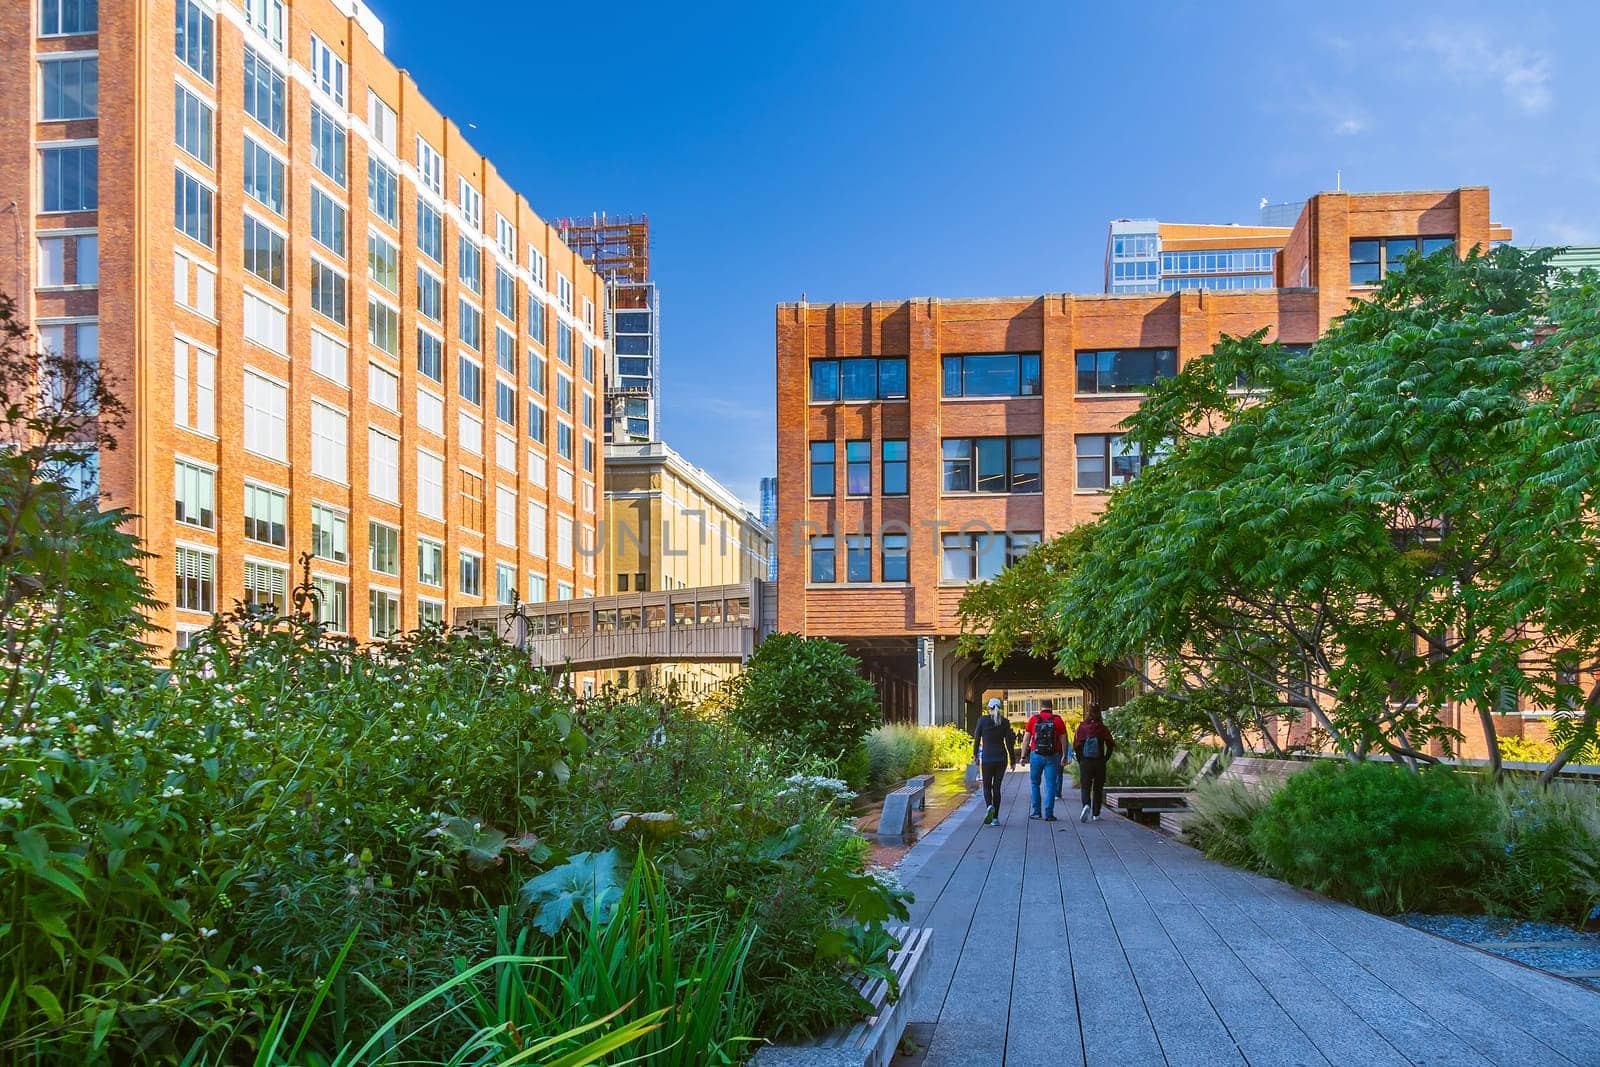  The High Line, a famous public park in Manhattan by f11photo